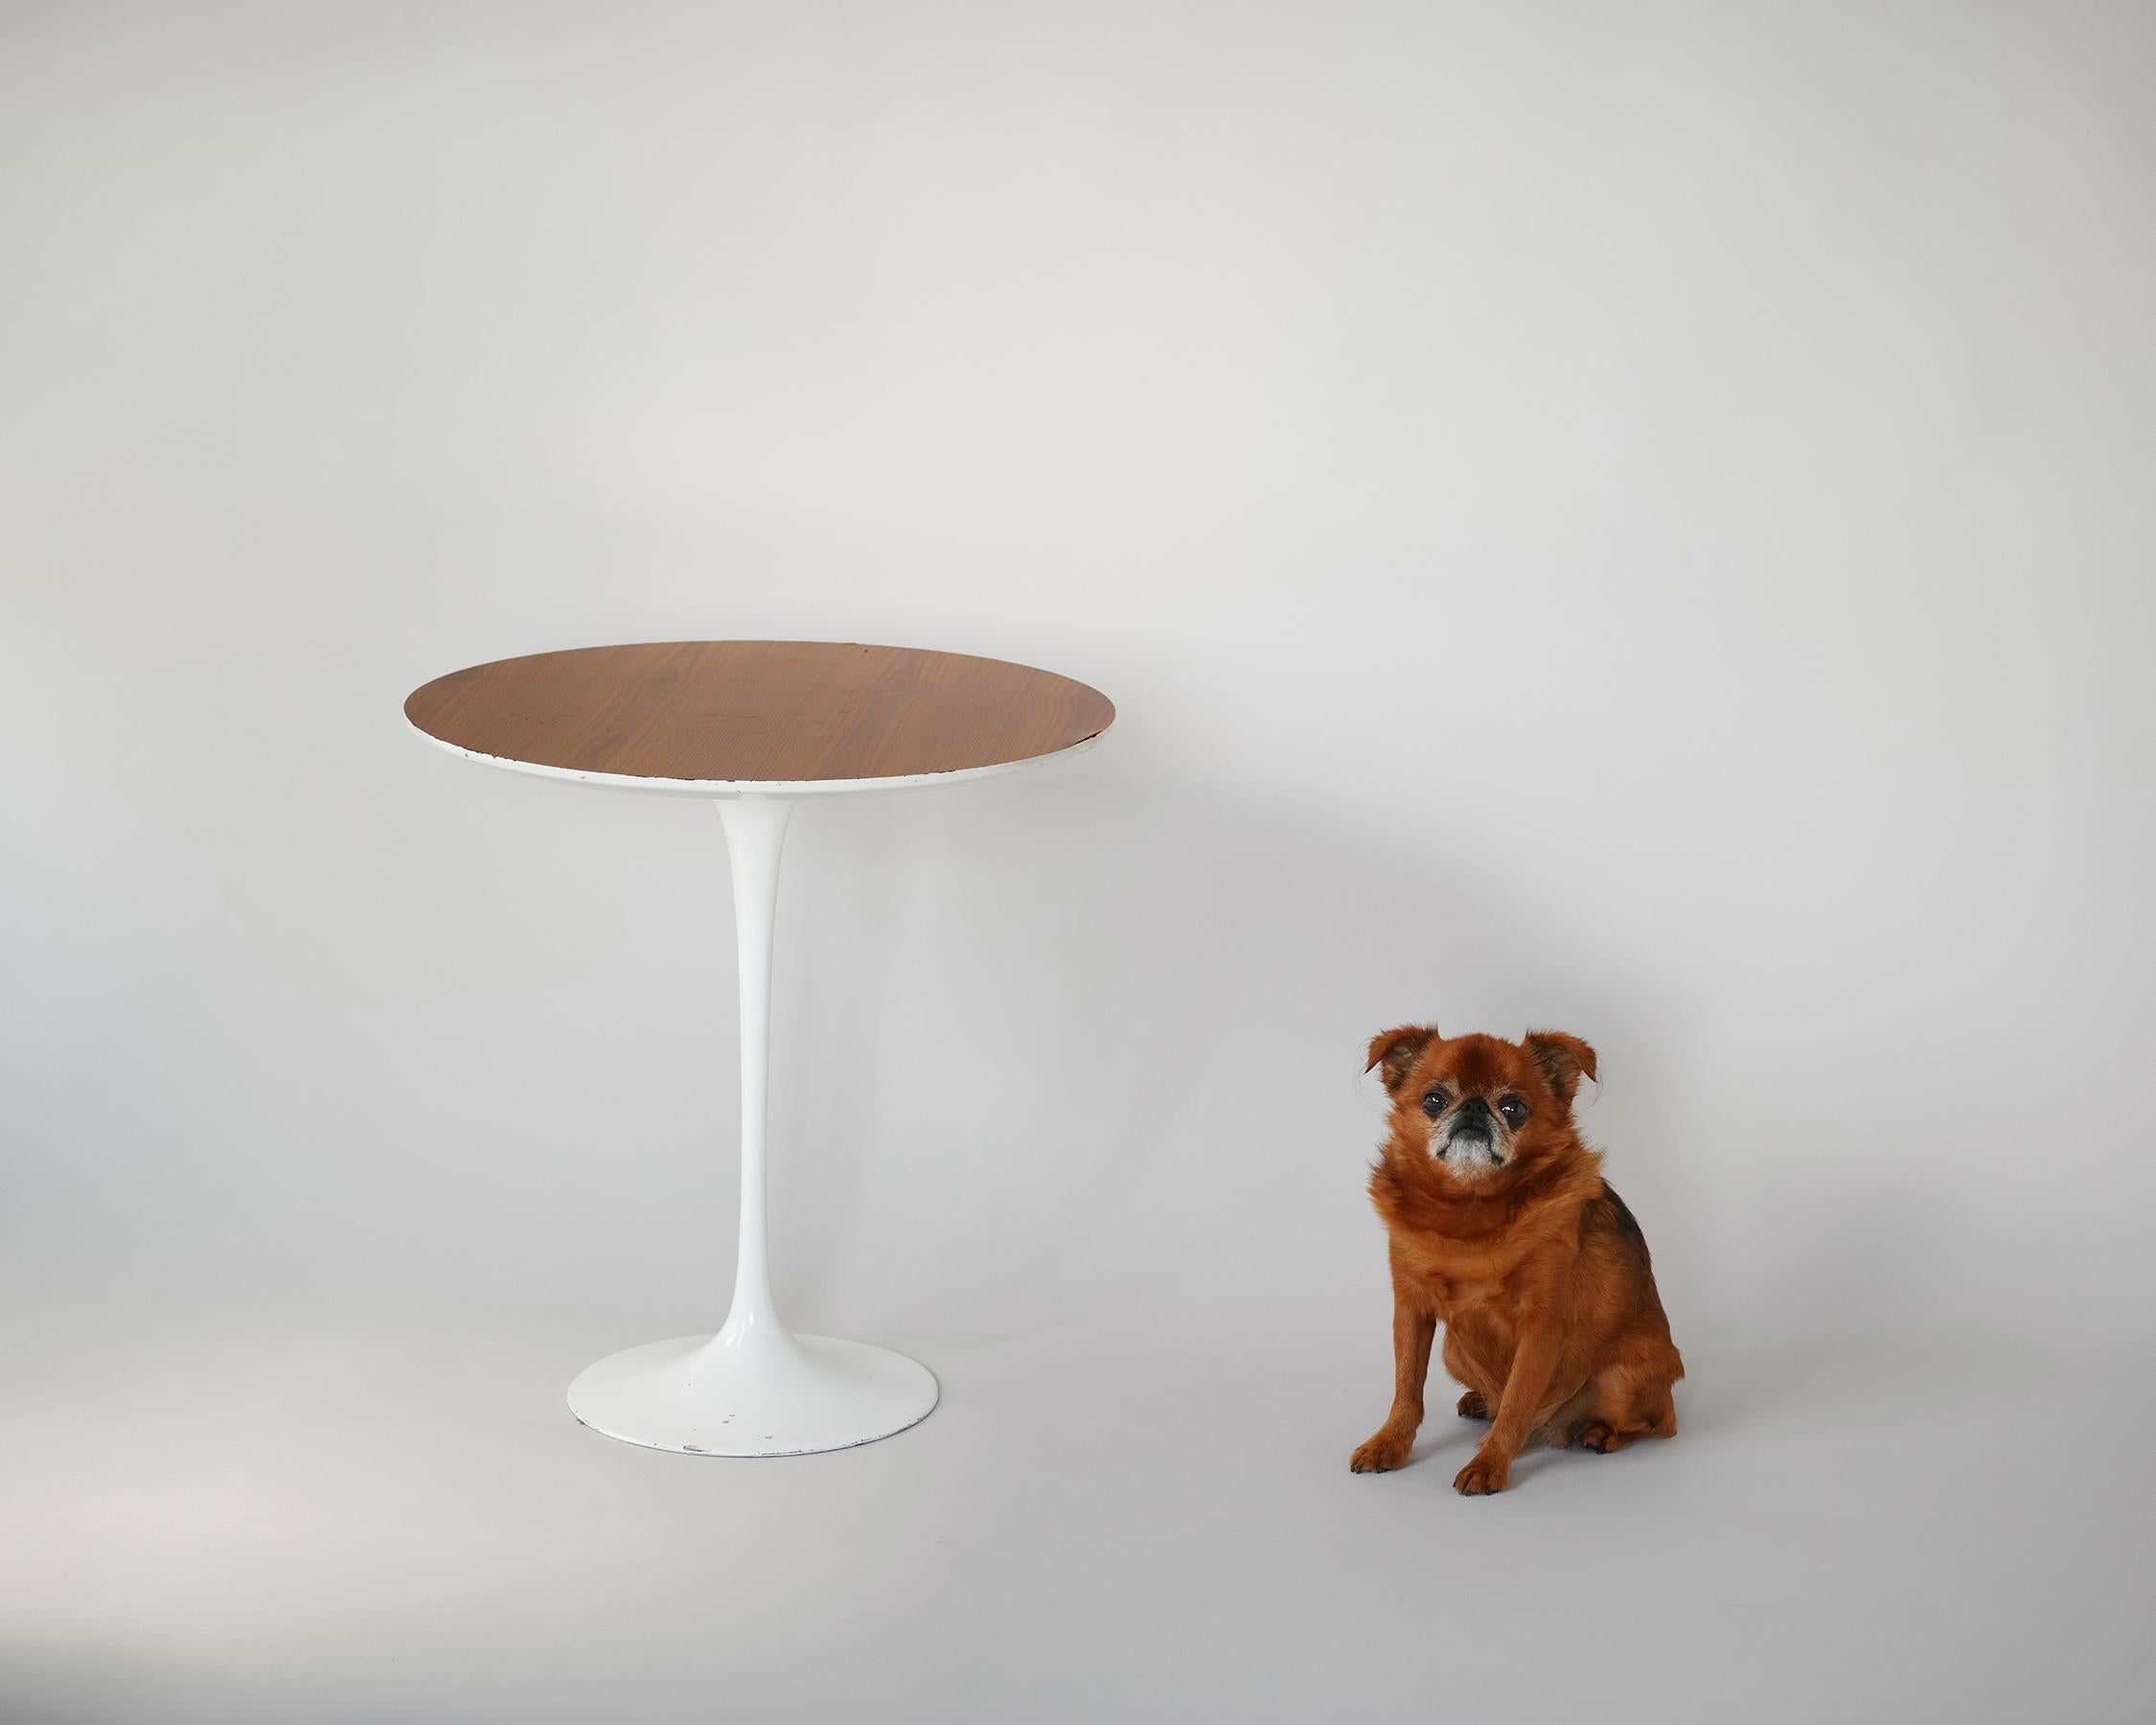 For your consideration is this all-original tulip side table designed in 1957 by Eero Saarinen for Knoll featuring an elegantly slim aluminum base with original off white finish and round walnut veneer top. An iconic classic of Mid-Century Modern